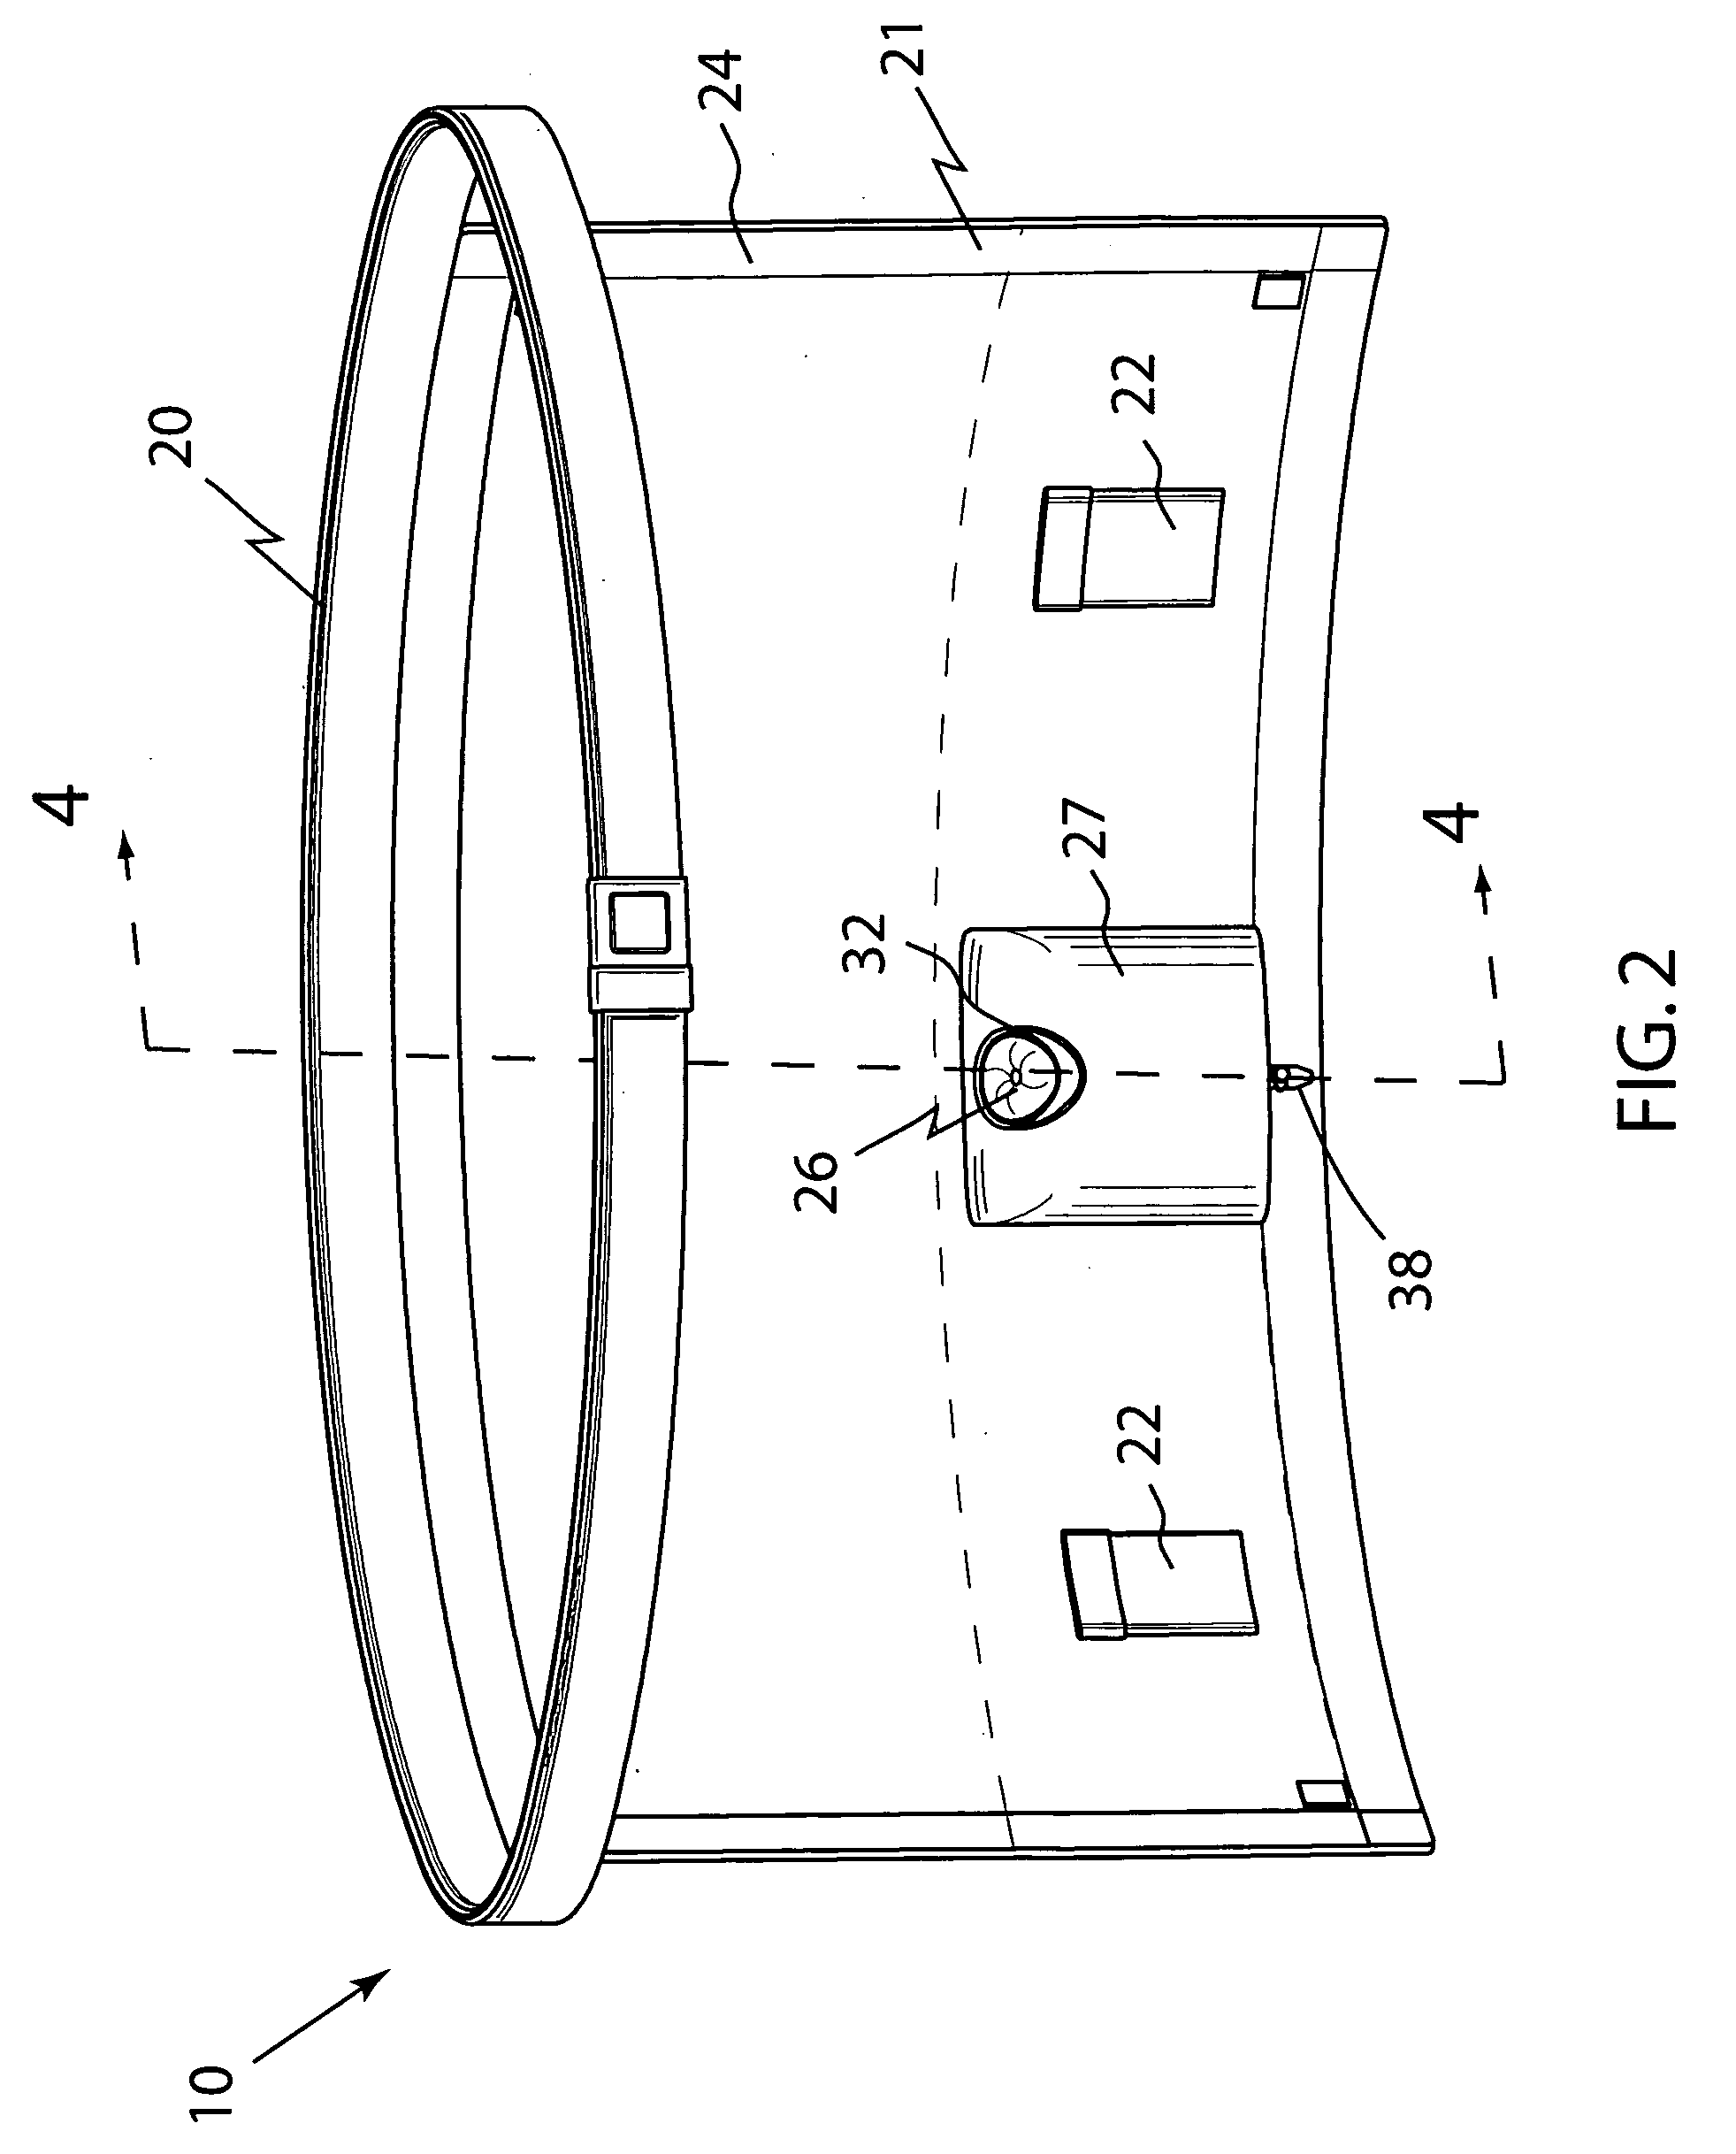 Male apron for receiving and storing excreted body fluids and associated method